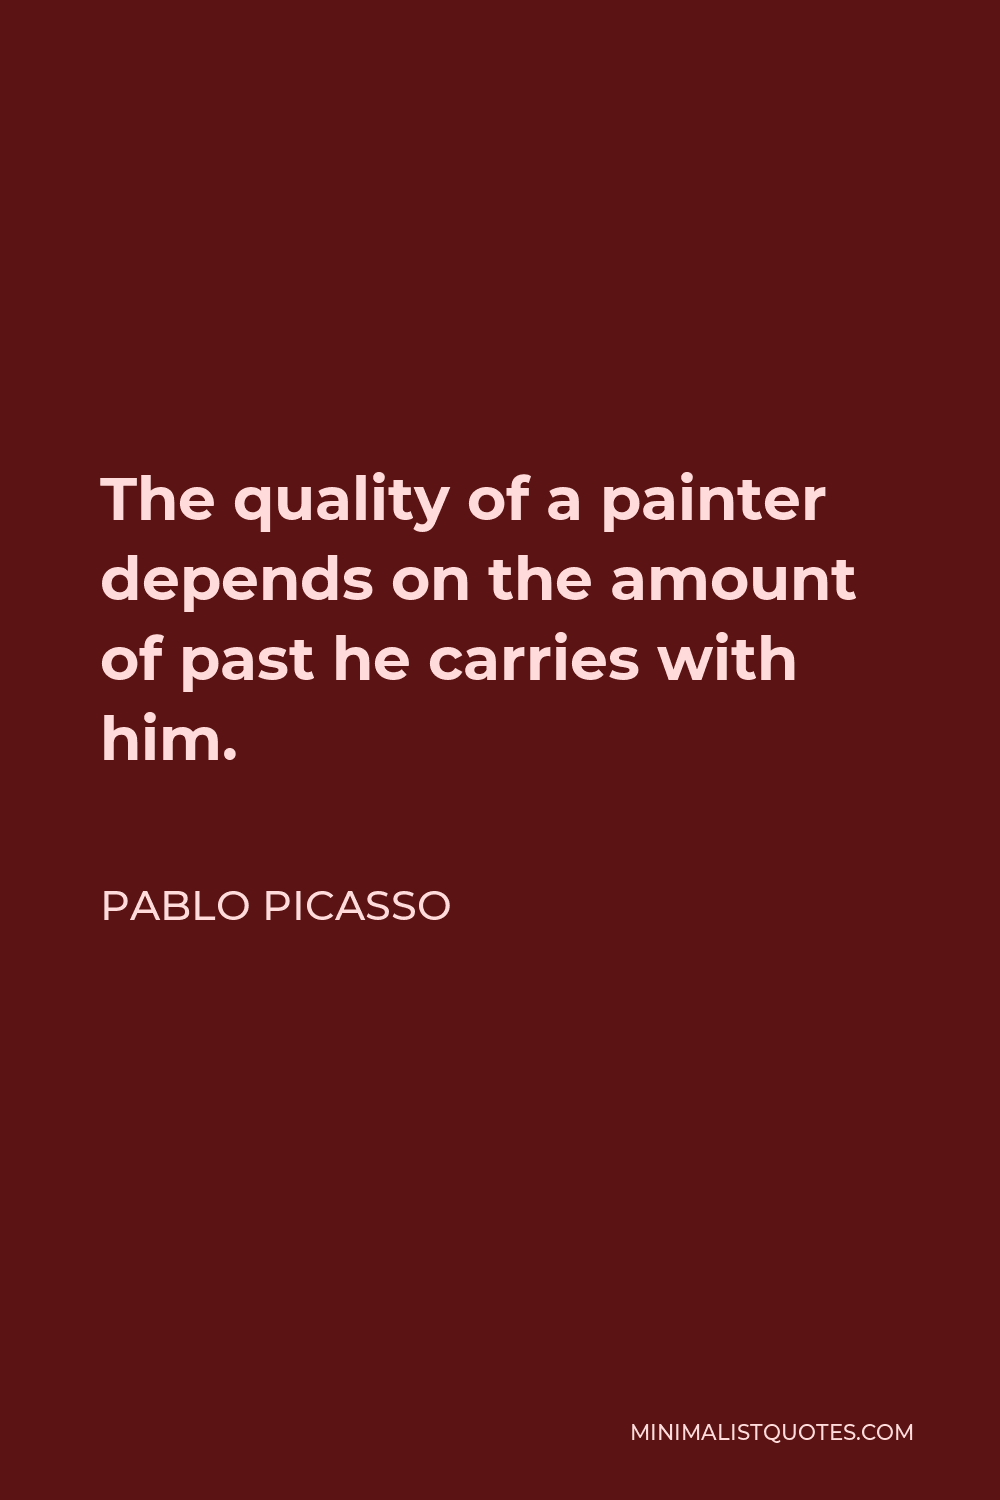 Pablo Picasso Quote - The quality of a painter depends on the amount of past he carries with him.